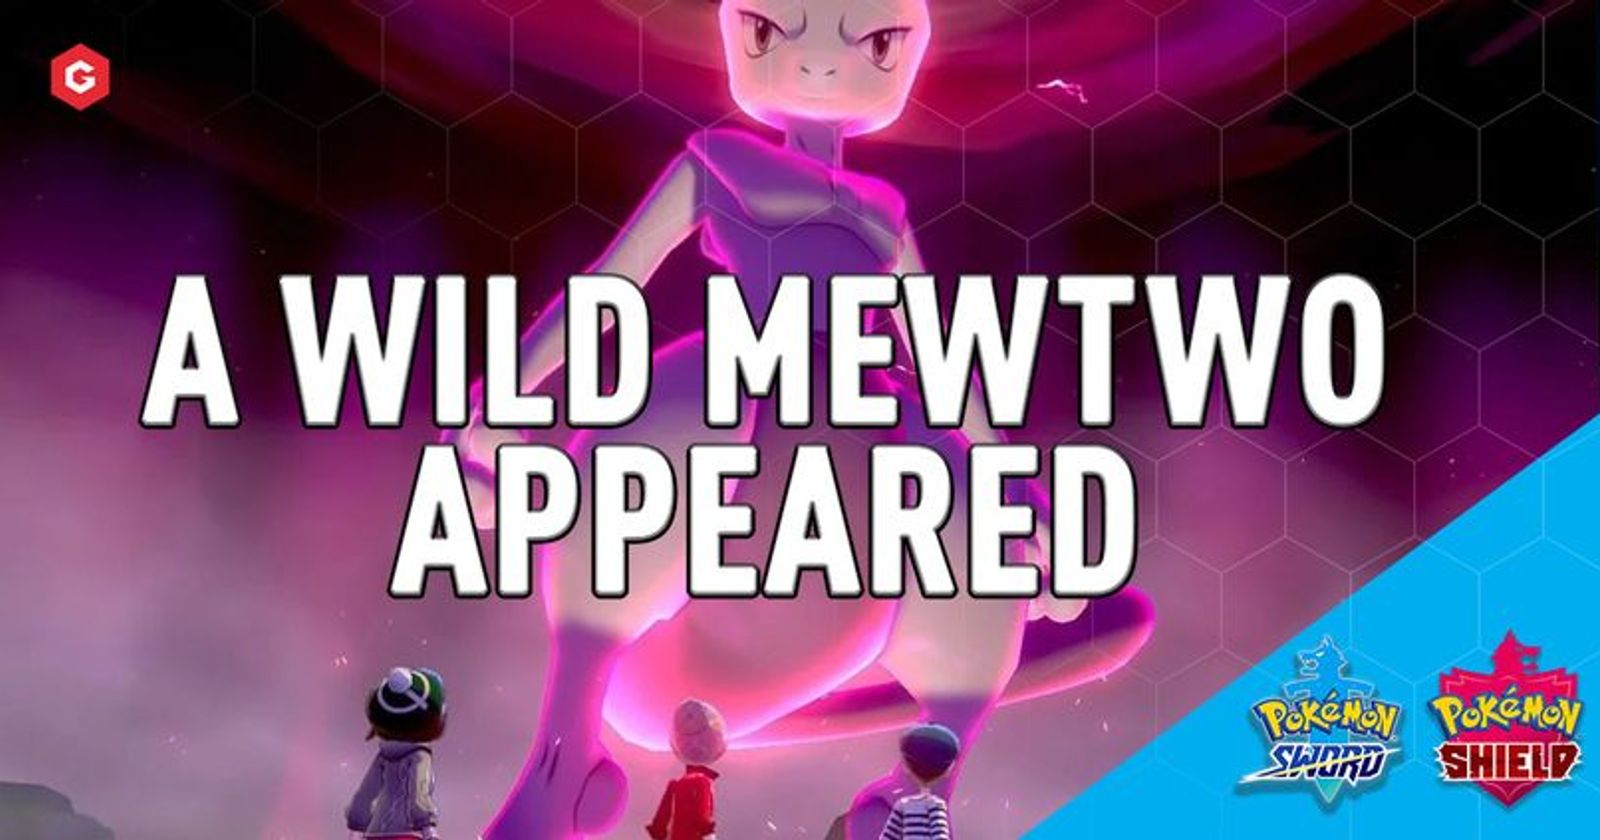 How to find and capture Armored Mewtwo in Pokémon Go - Dot Esports